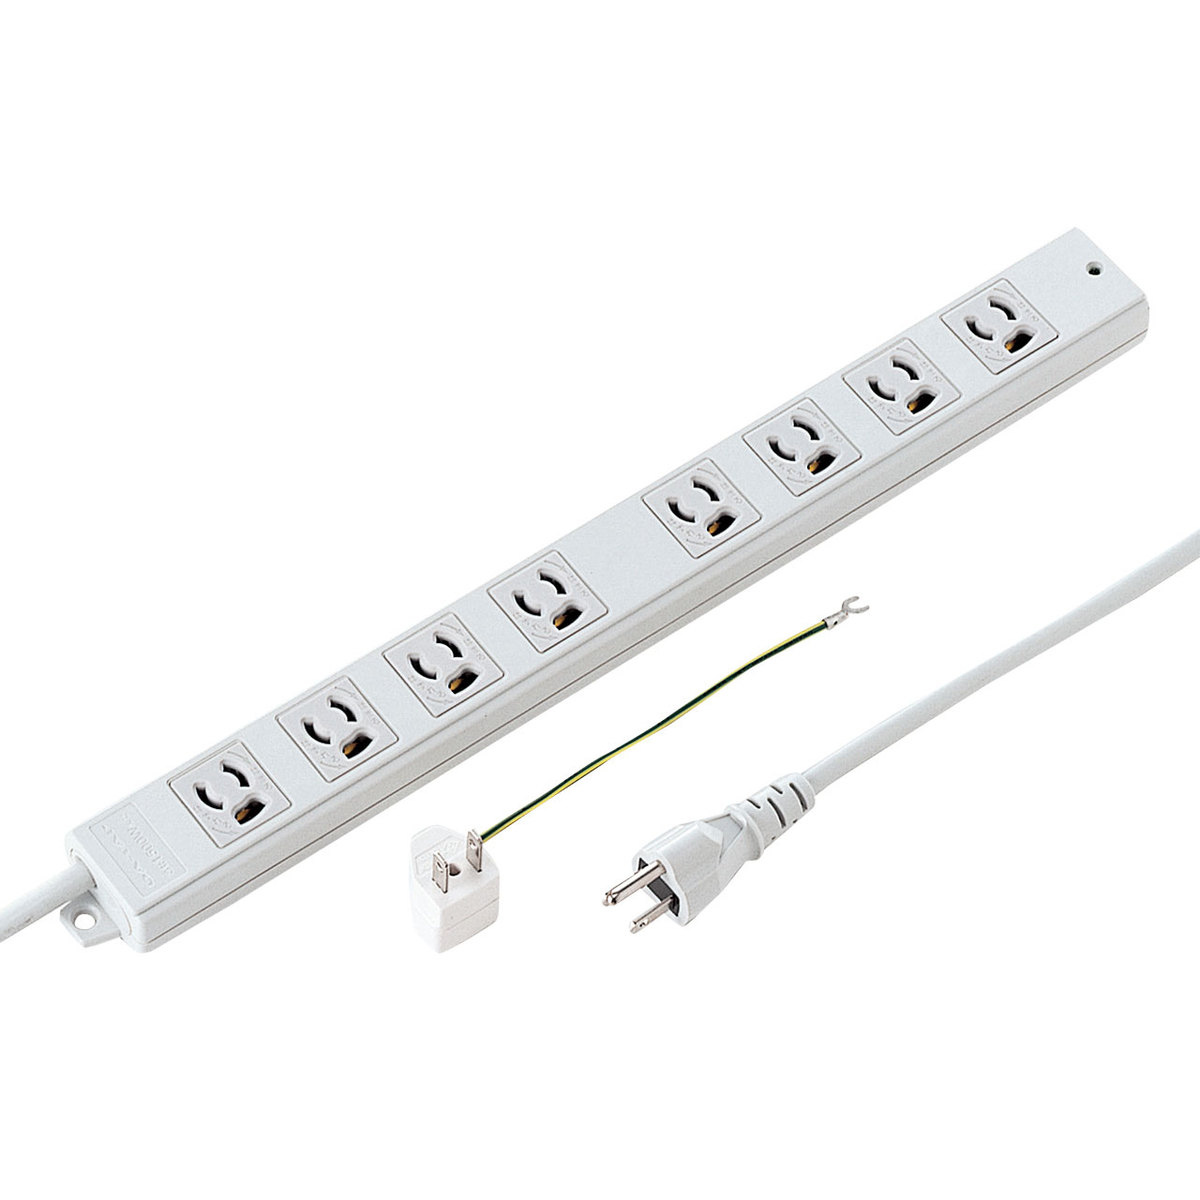 8-Outlet Power Strip with Magnetic Release Prevention (Line-Shaped Basic Model)